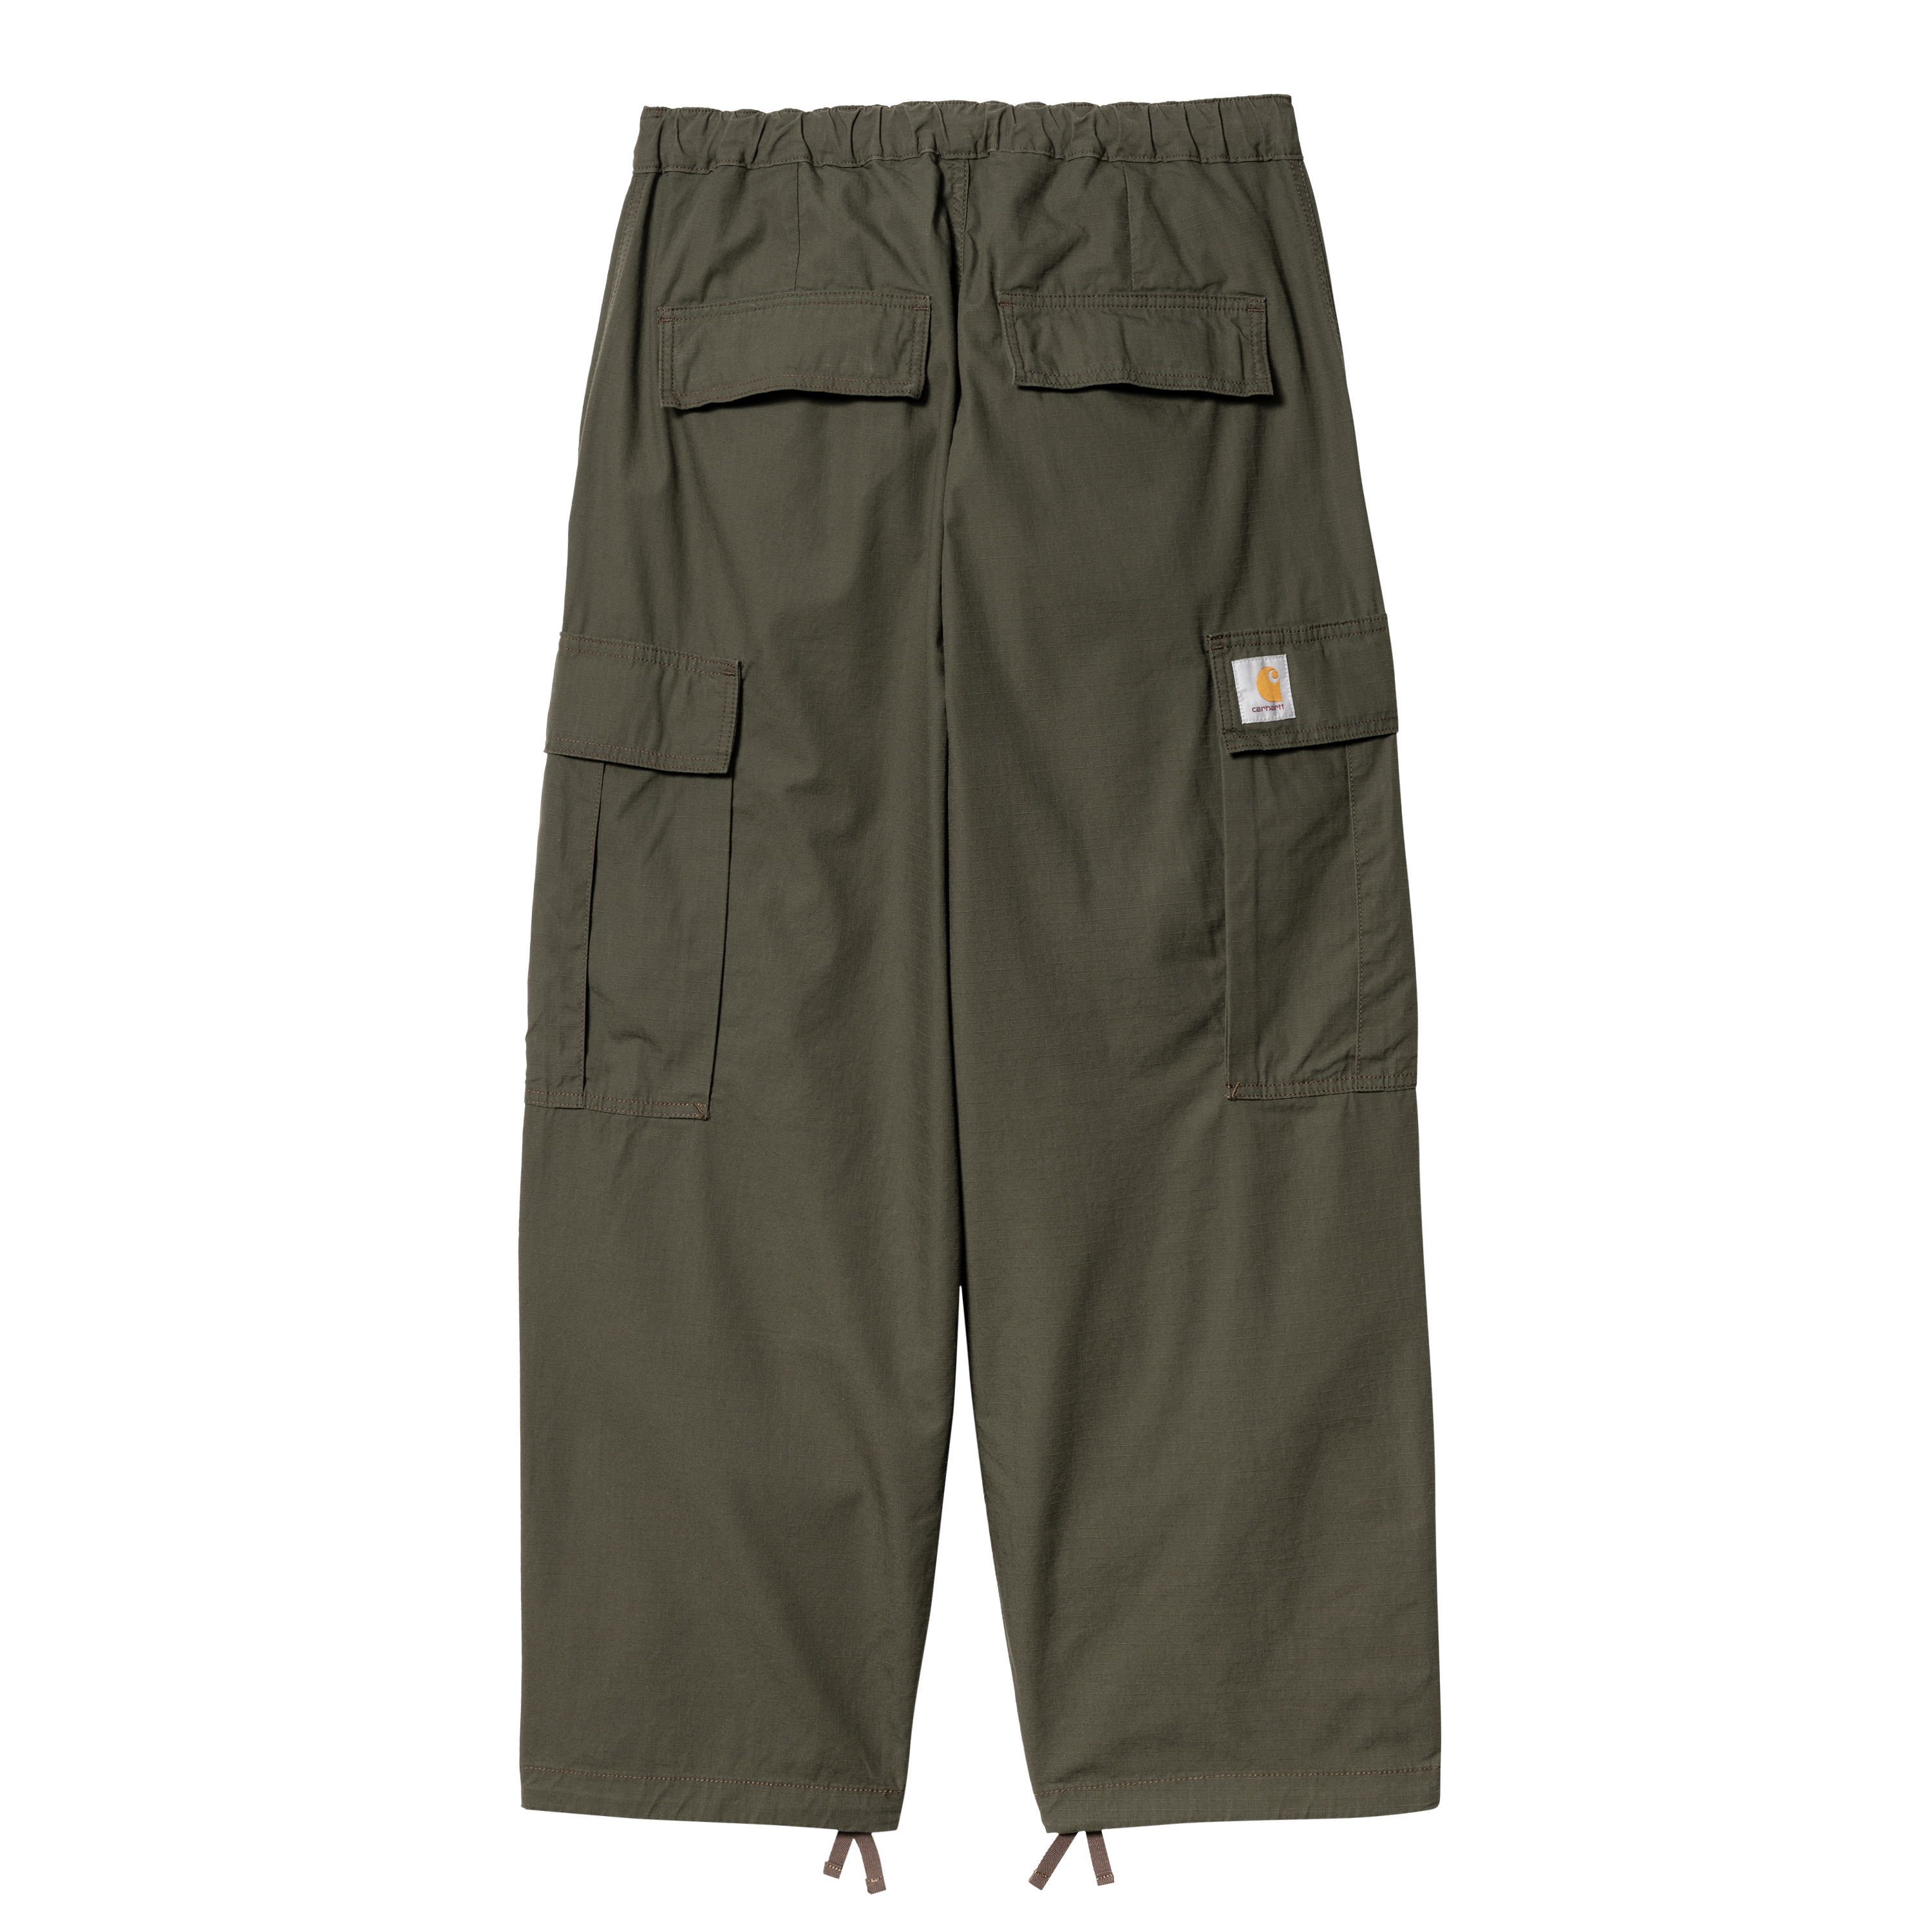 Carhartt Womens Size 14 WB005 DWD cropped cargo pants Olive/Green